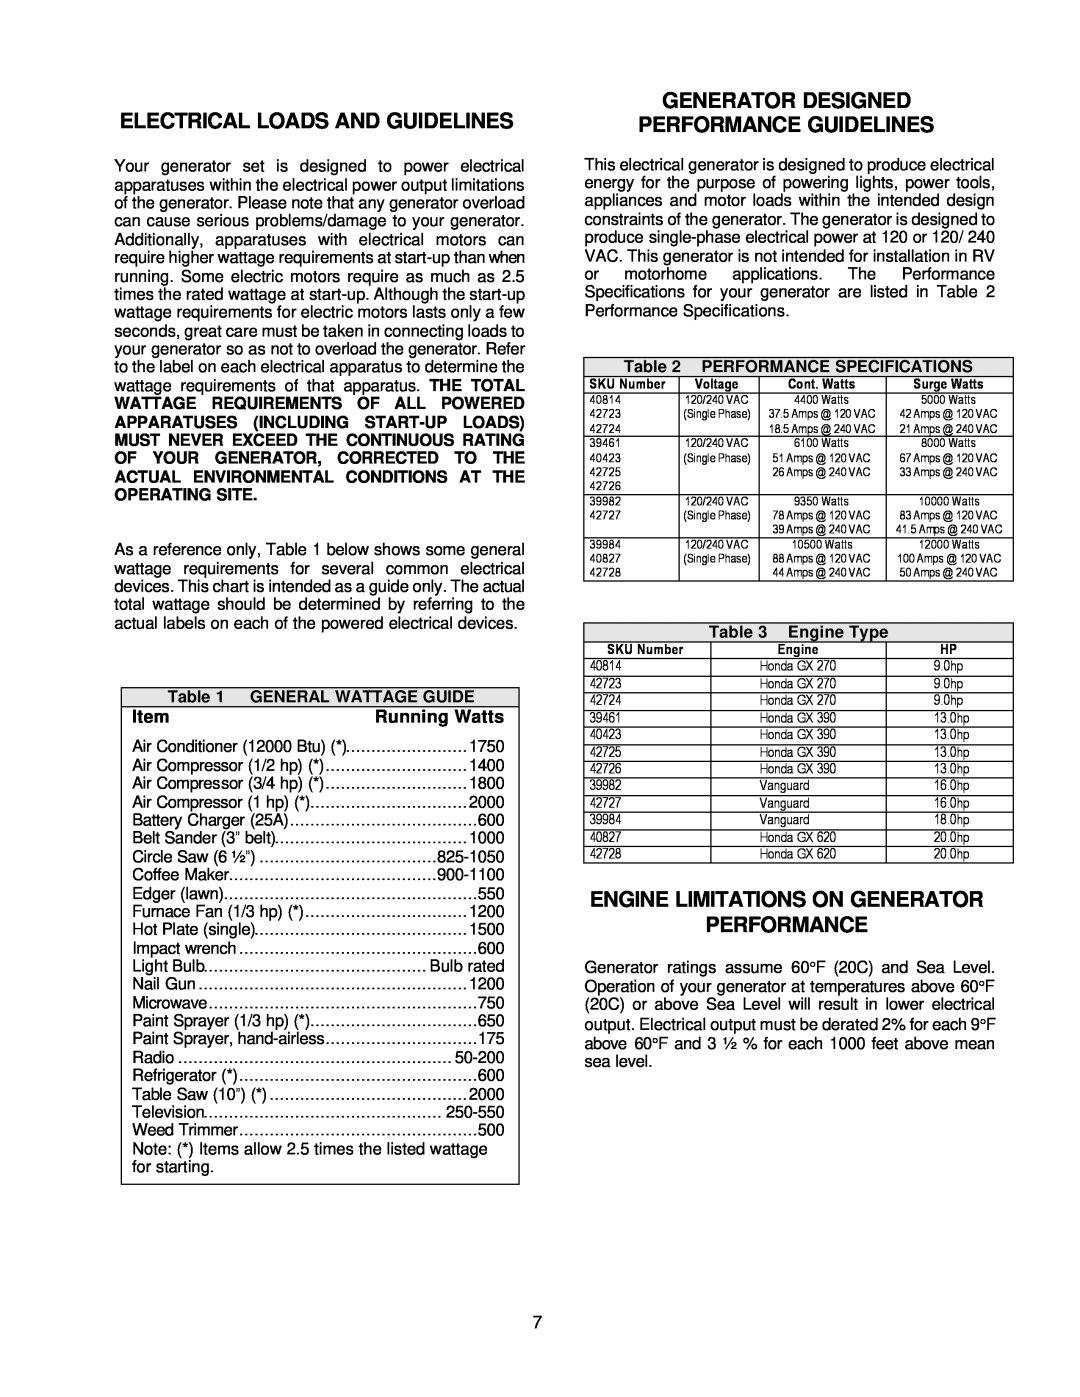 Chicago Electric 39984, 42727 Electrical Loads And Guidelines, Generator Designed Performance Guidelines, Running Watts 